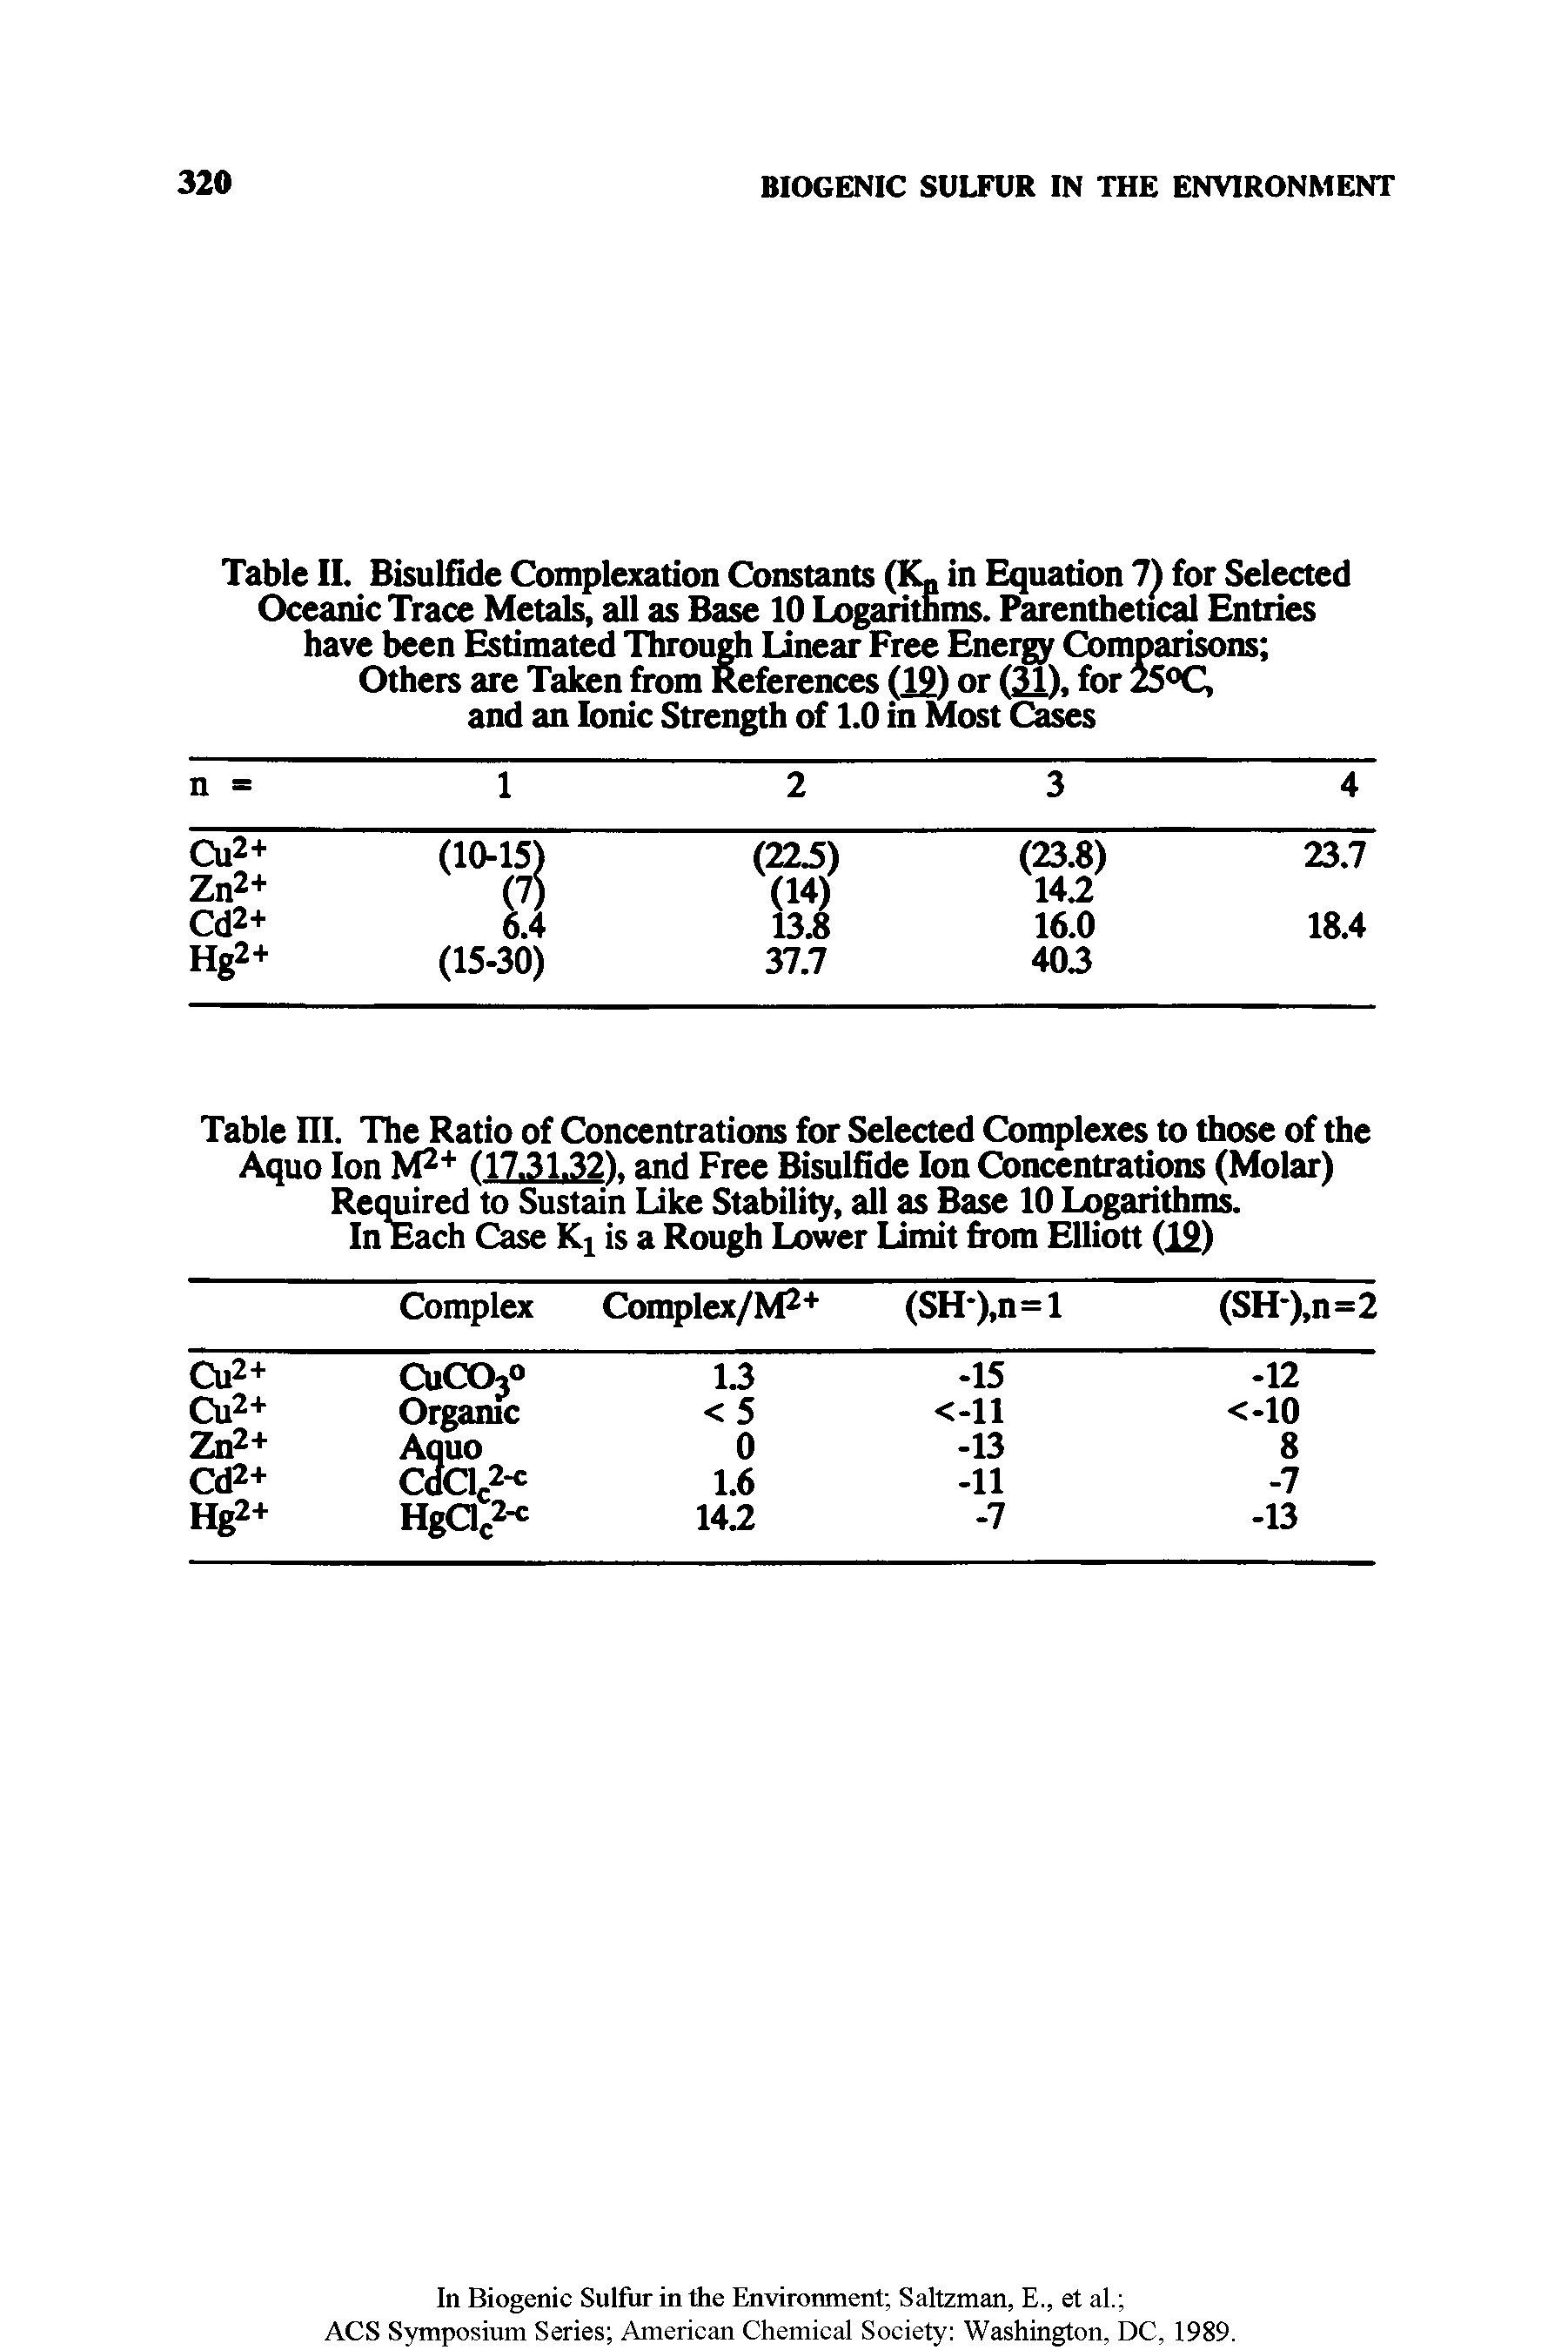 Table III. The Ratio of Concentrations for Selected Complexes to those of the Aquo Ion M24, (17.31.321. and Free Bisulfide Ion Concentrations (Molar) Required to Sustain Like Stability, all as Base 10 Logarithms.